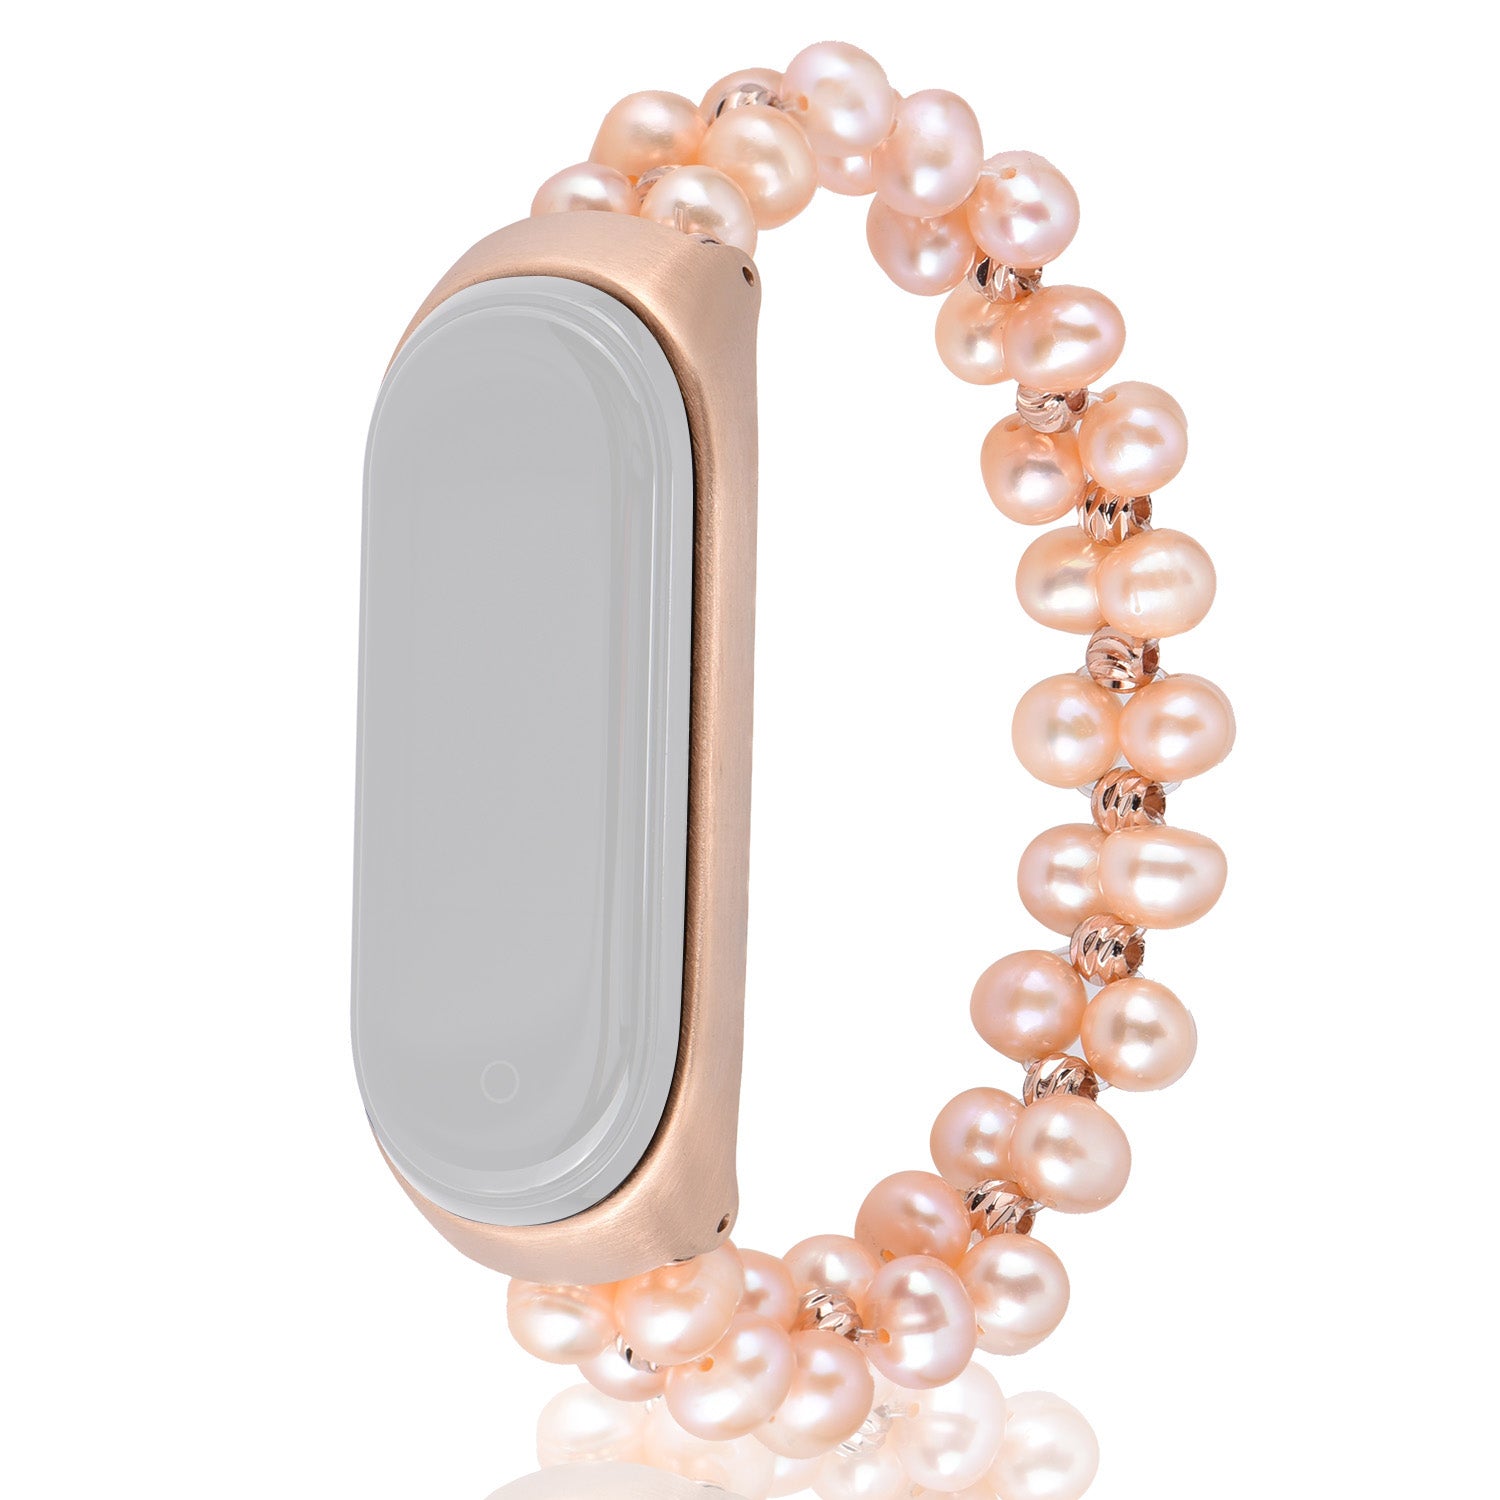 For Xiaomi Mi Band 3/4 Replacement Pearls Bracelet Watch Strap Wrist Band - Pink